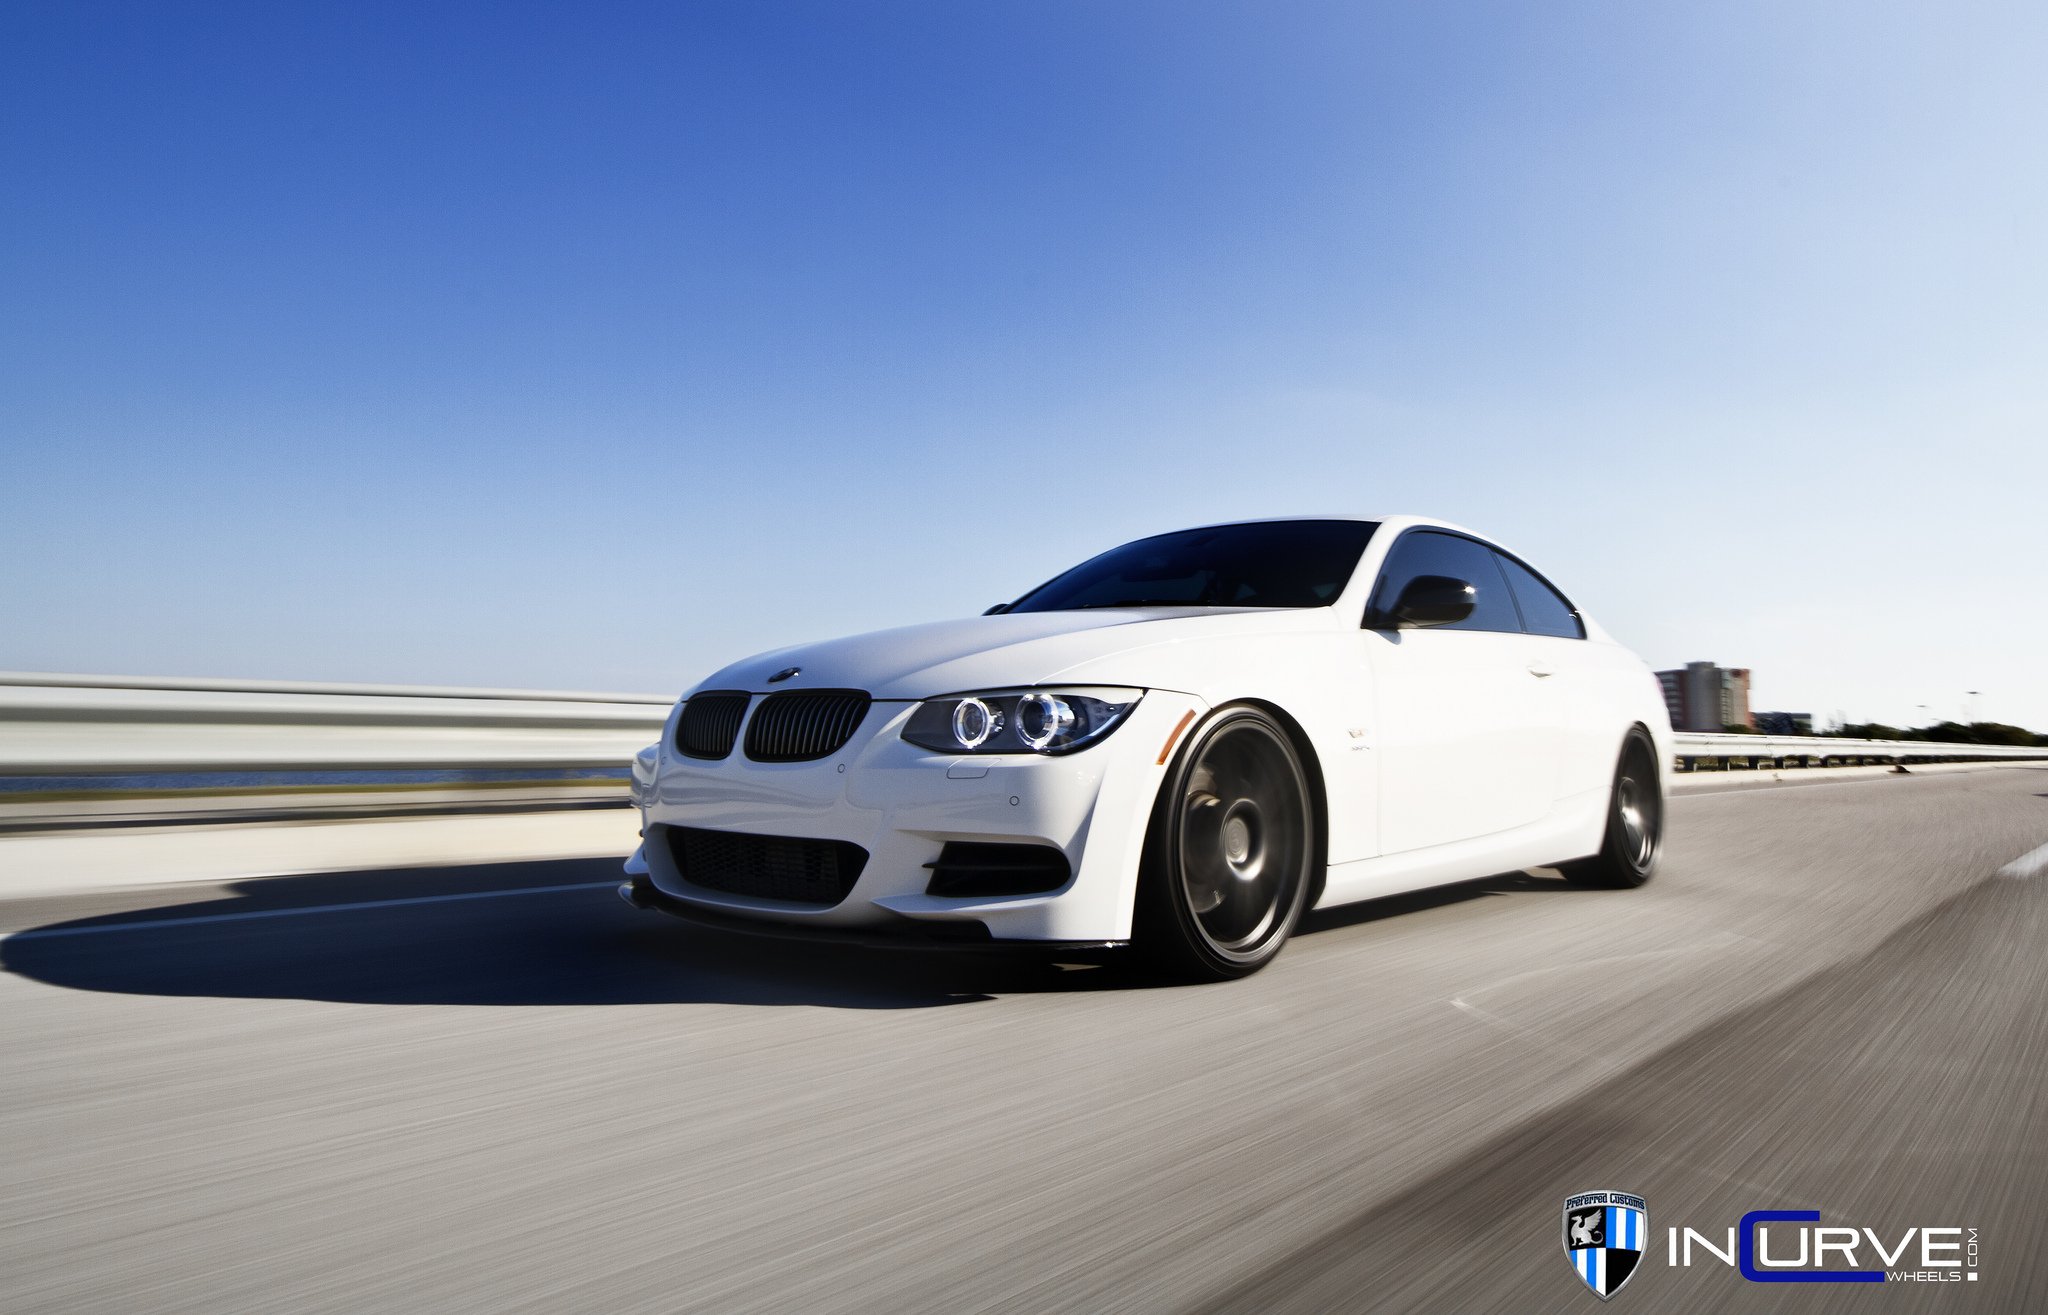 2015, Incurve, Wheels, Cars, Tuning, Bmw, 335is Wallpaper